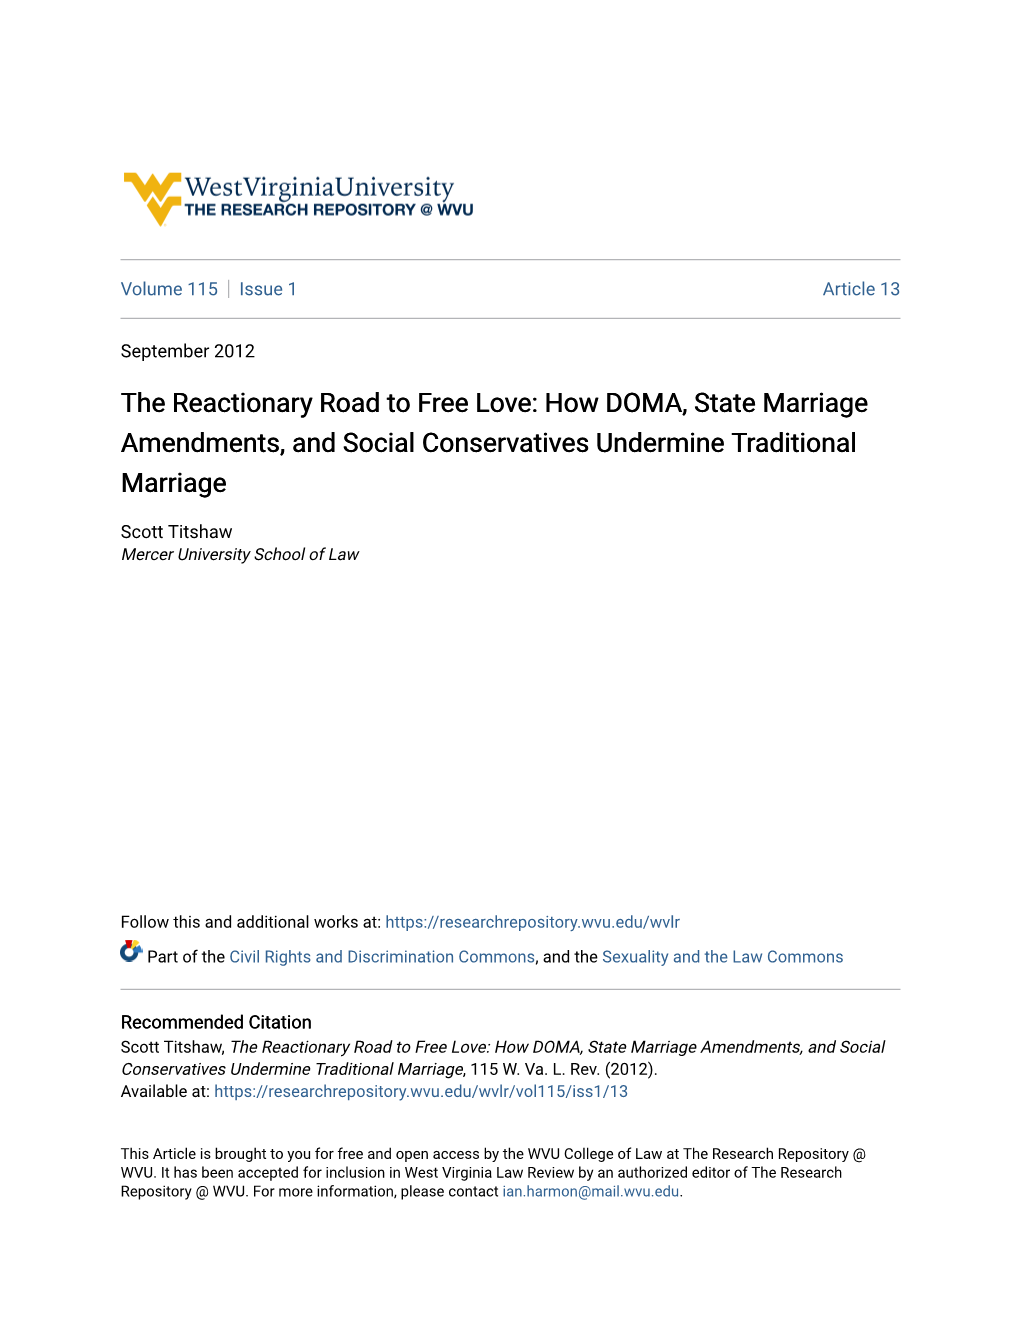 How DOMA, State Marriage Amendments, and Social Conservatives Undermine Traditional Marriage